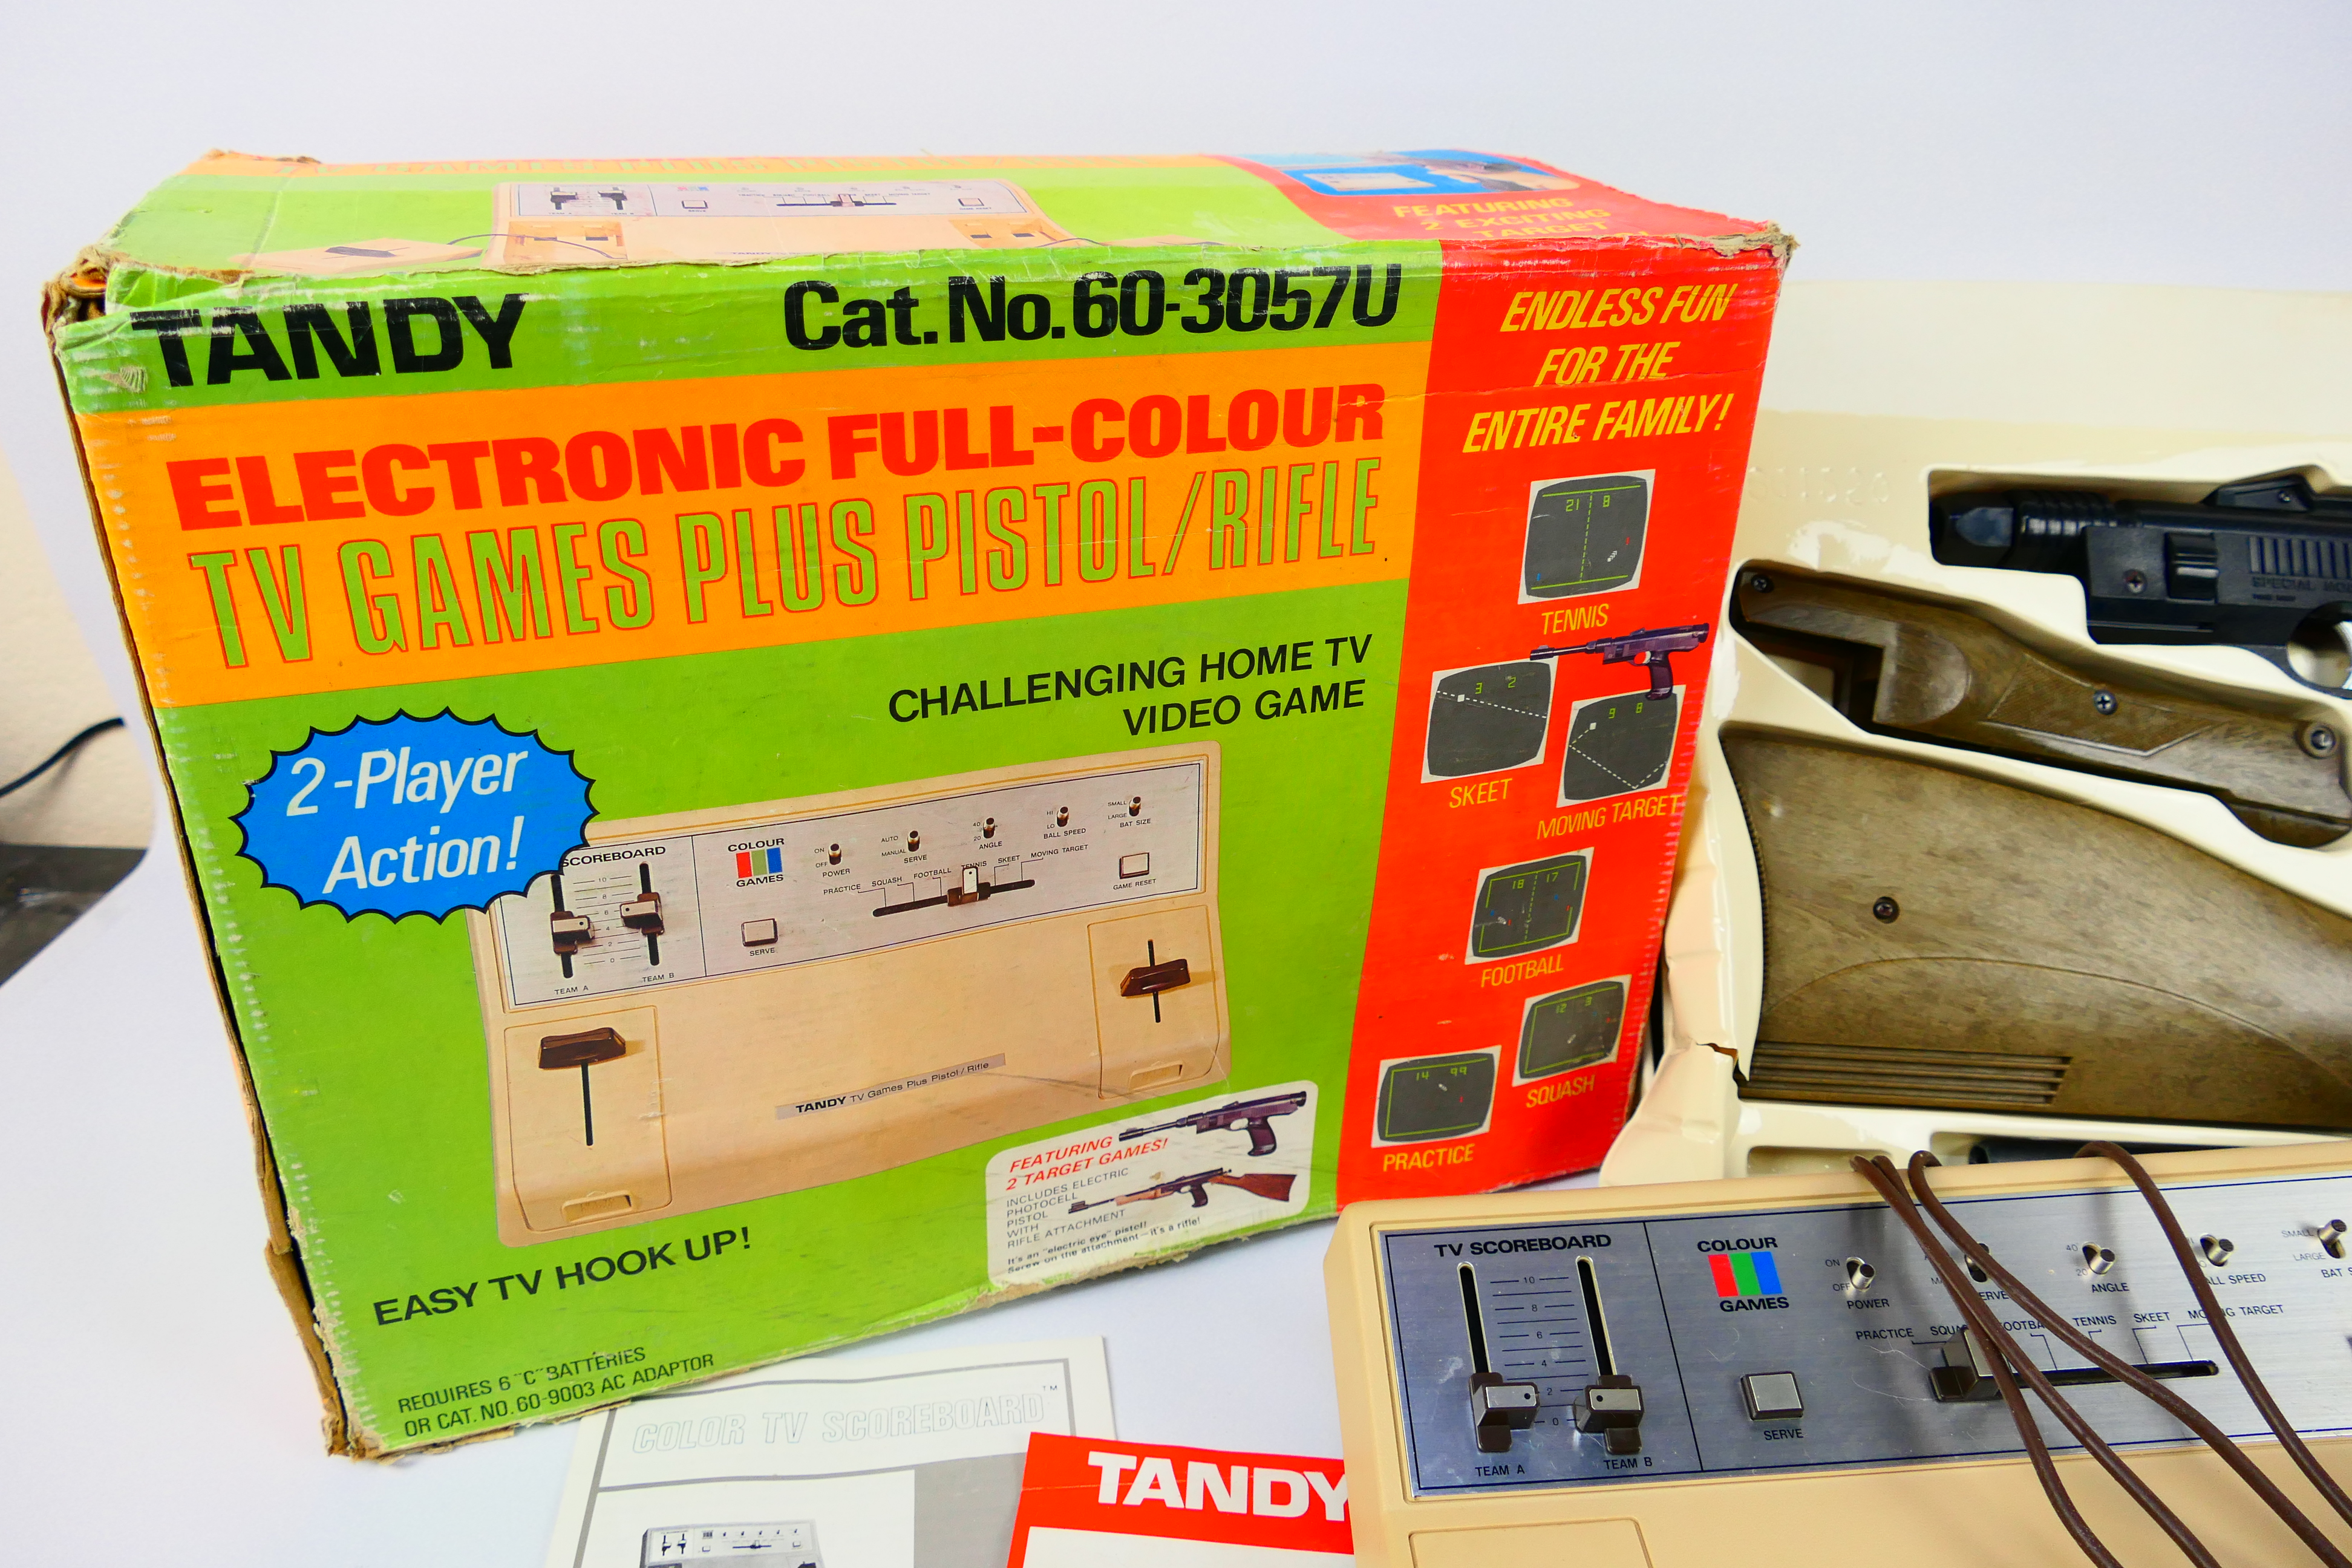 Tandy - A vintage Electronic Full Colour Pistol/Rifle game - Comes with pistol and rifle attachment. - Image 4 of 5